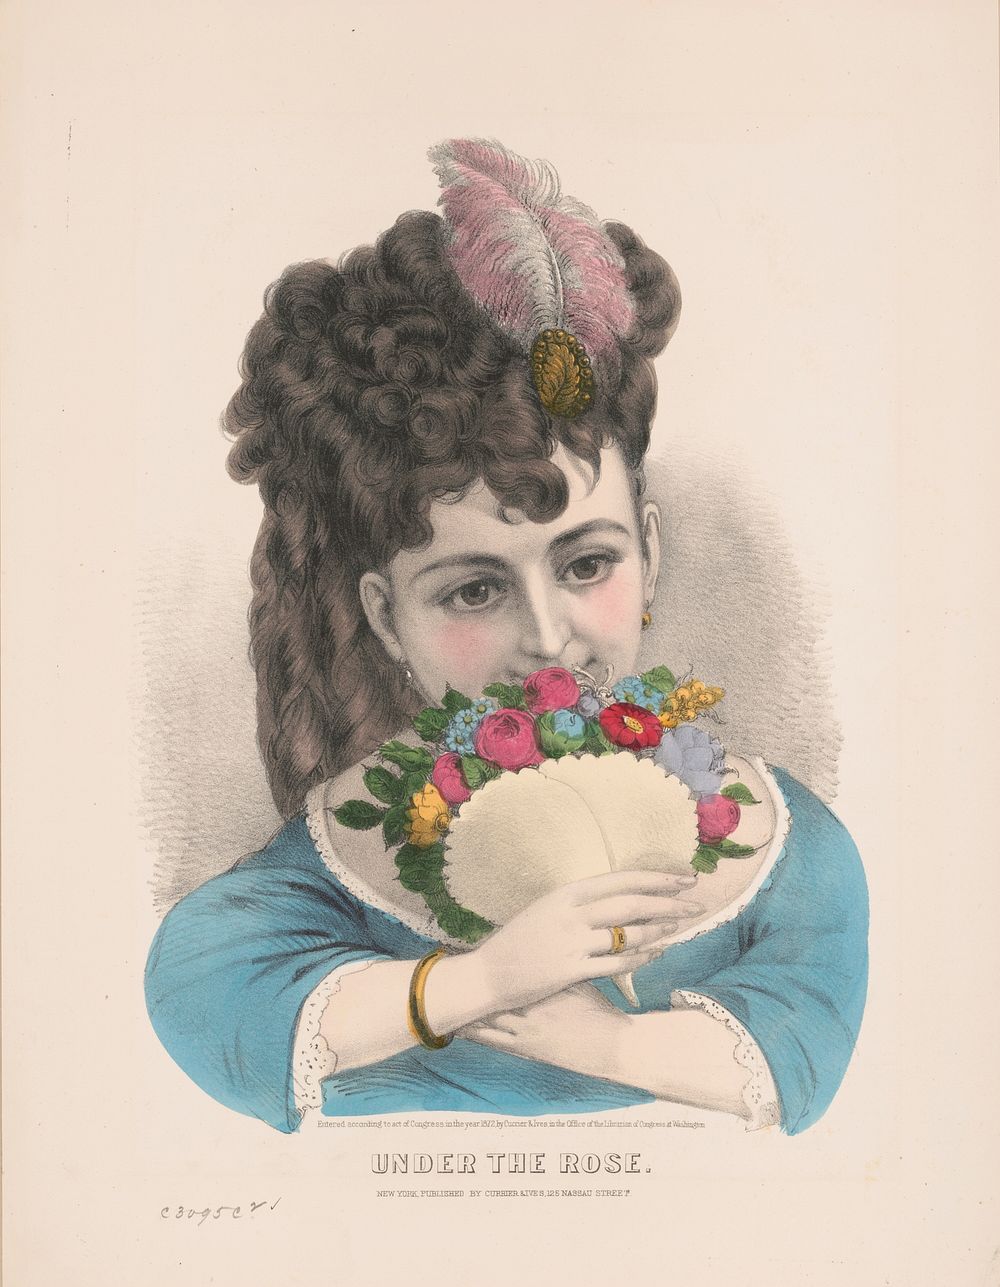 Under the rose (1872) by Currier & Ives